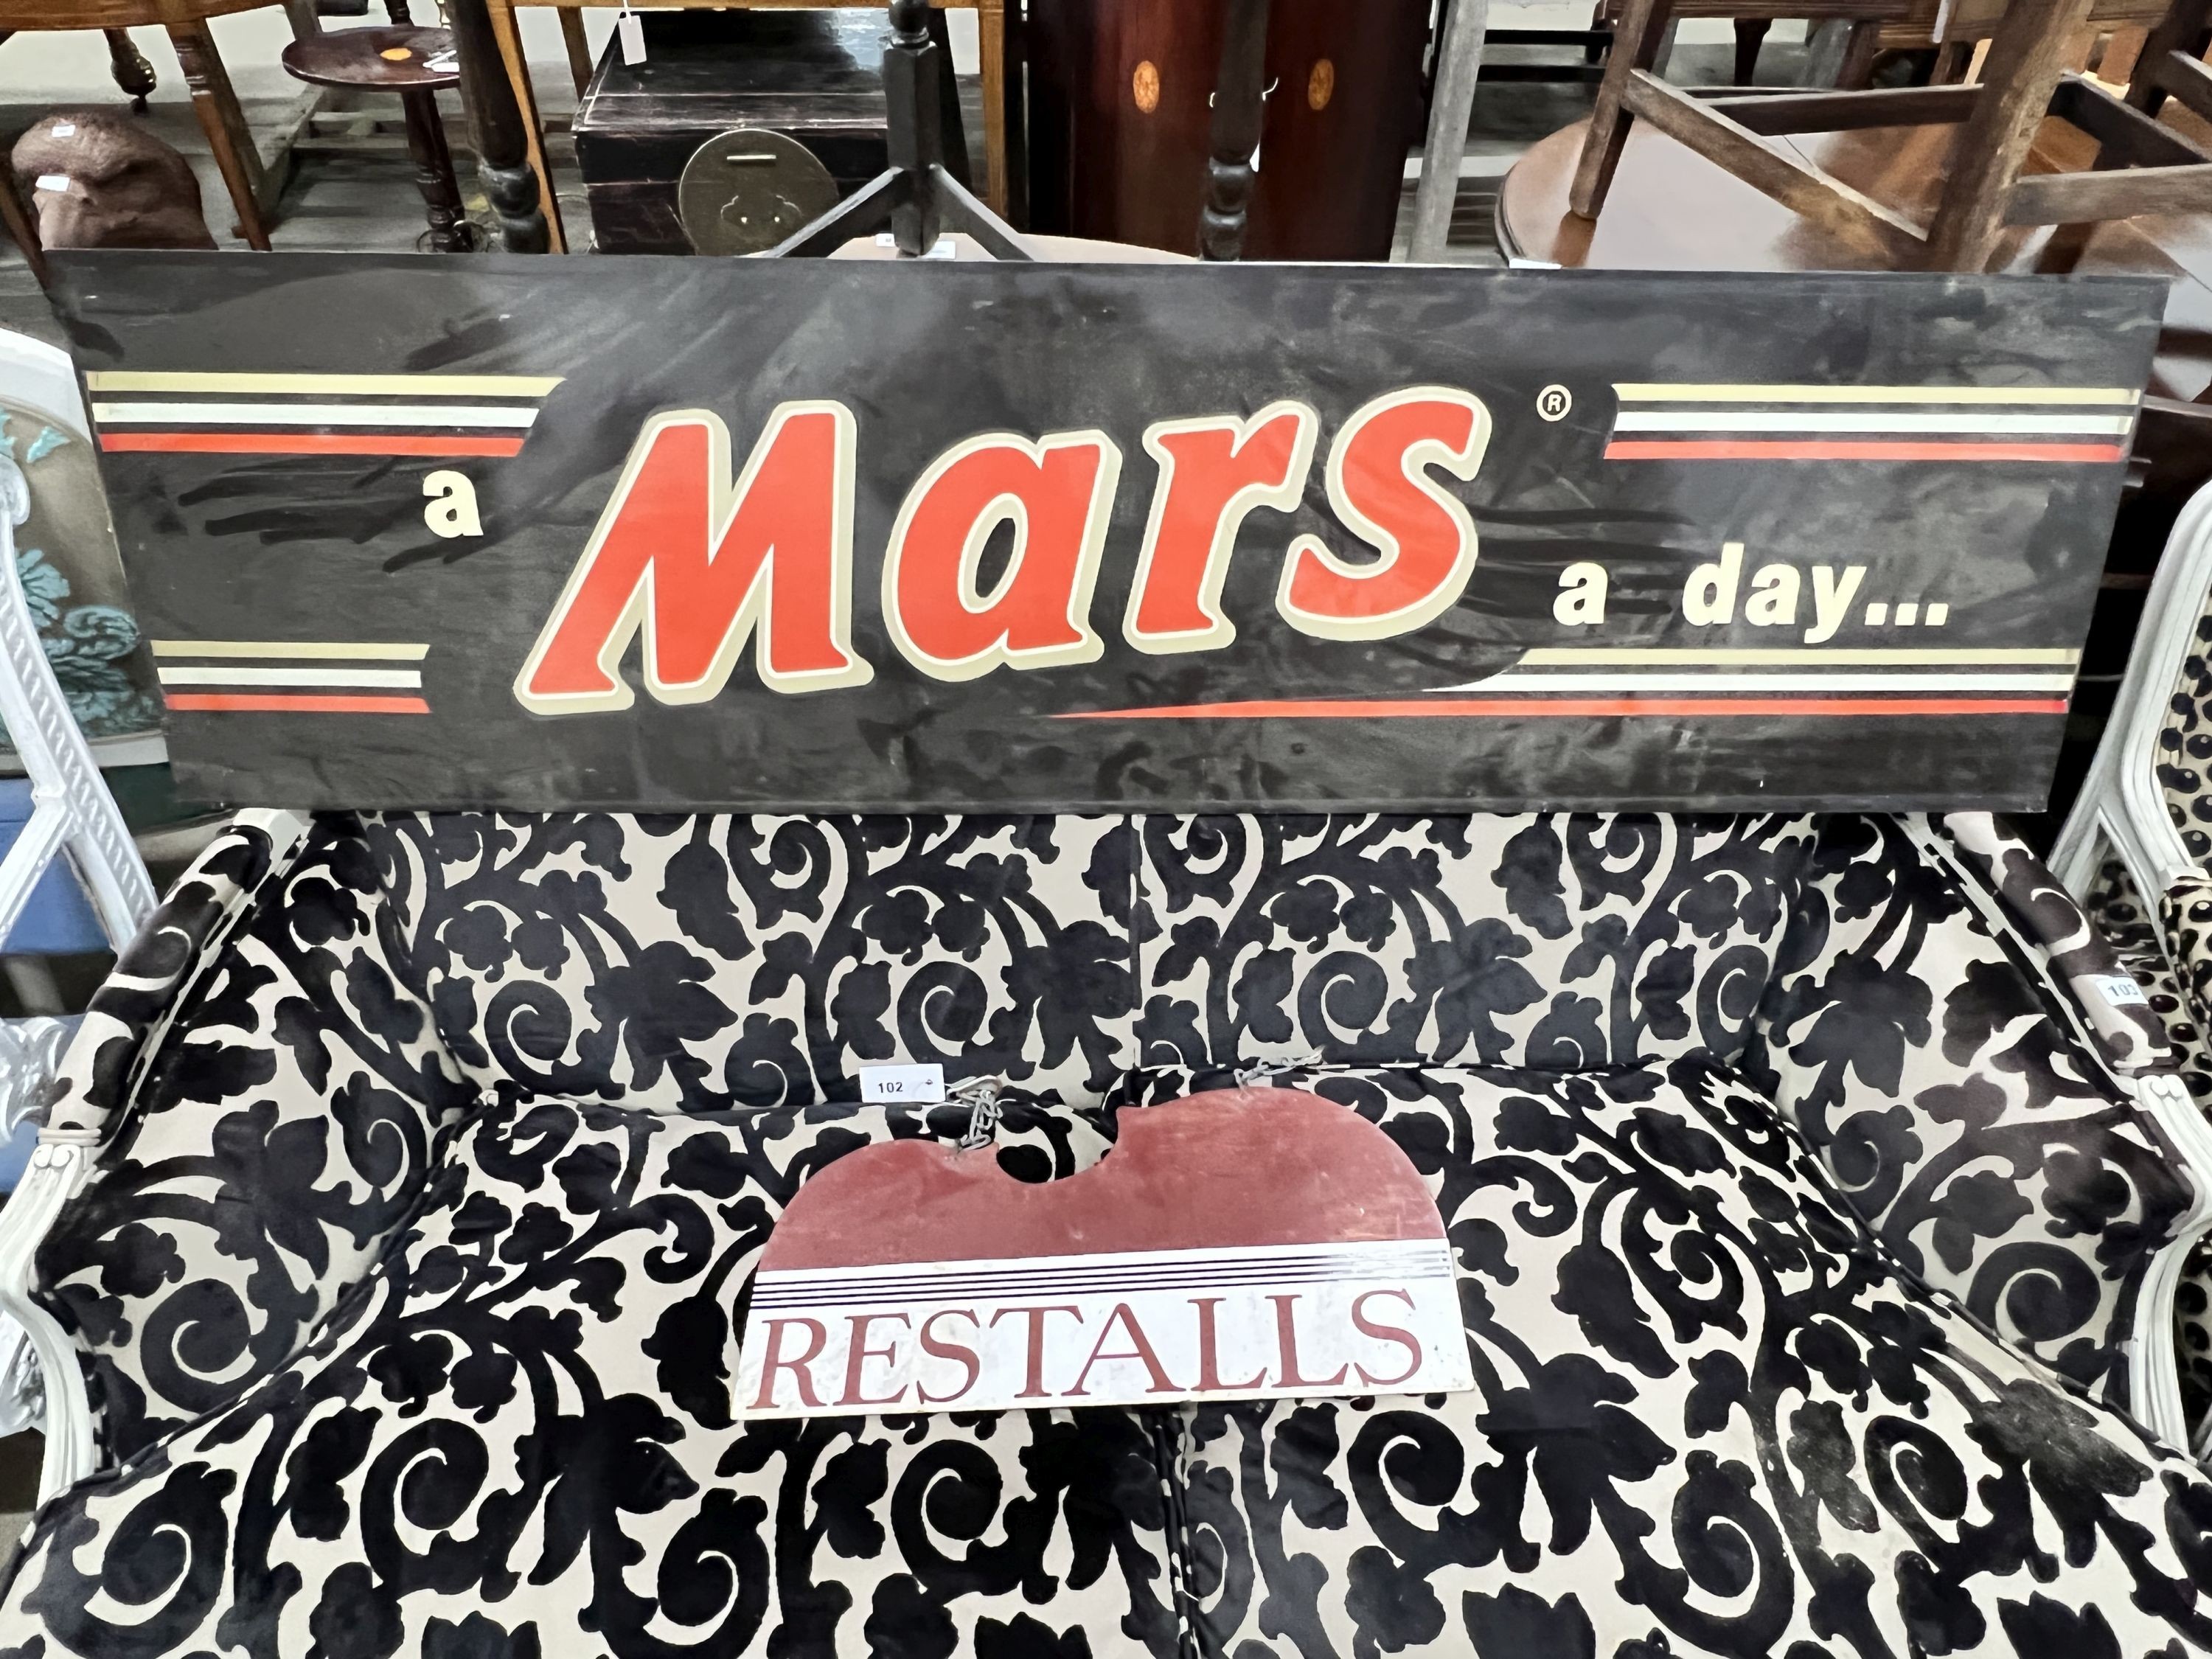 A 'Mars' chocolate advertising sign, length 153cm, height 42cm, and a 'Restalls' enamelled hanging sign